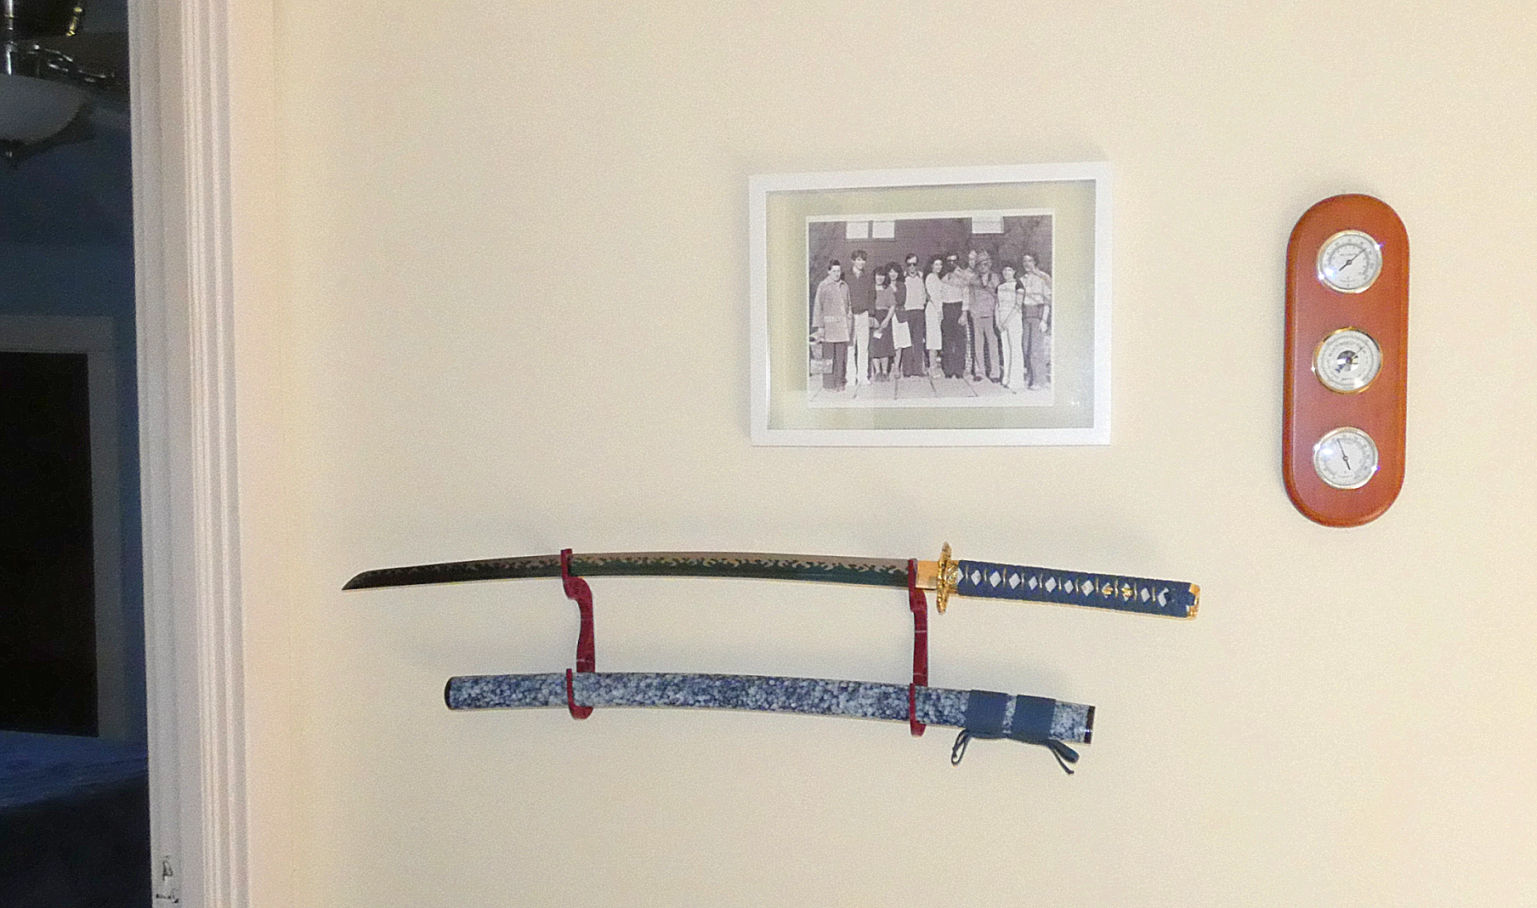 Designed 3D printed sword mounts, made for Katana but fit the